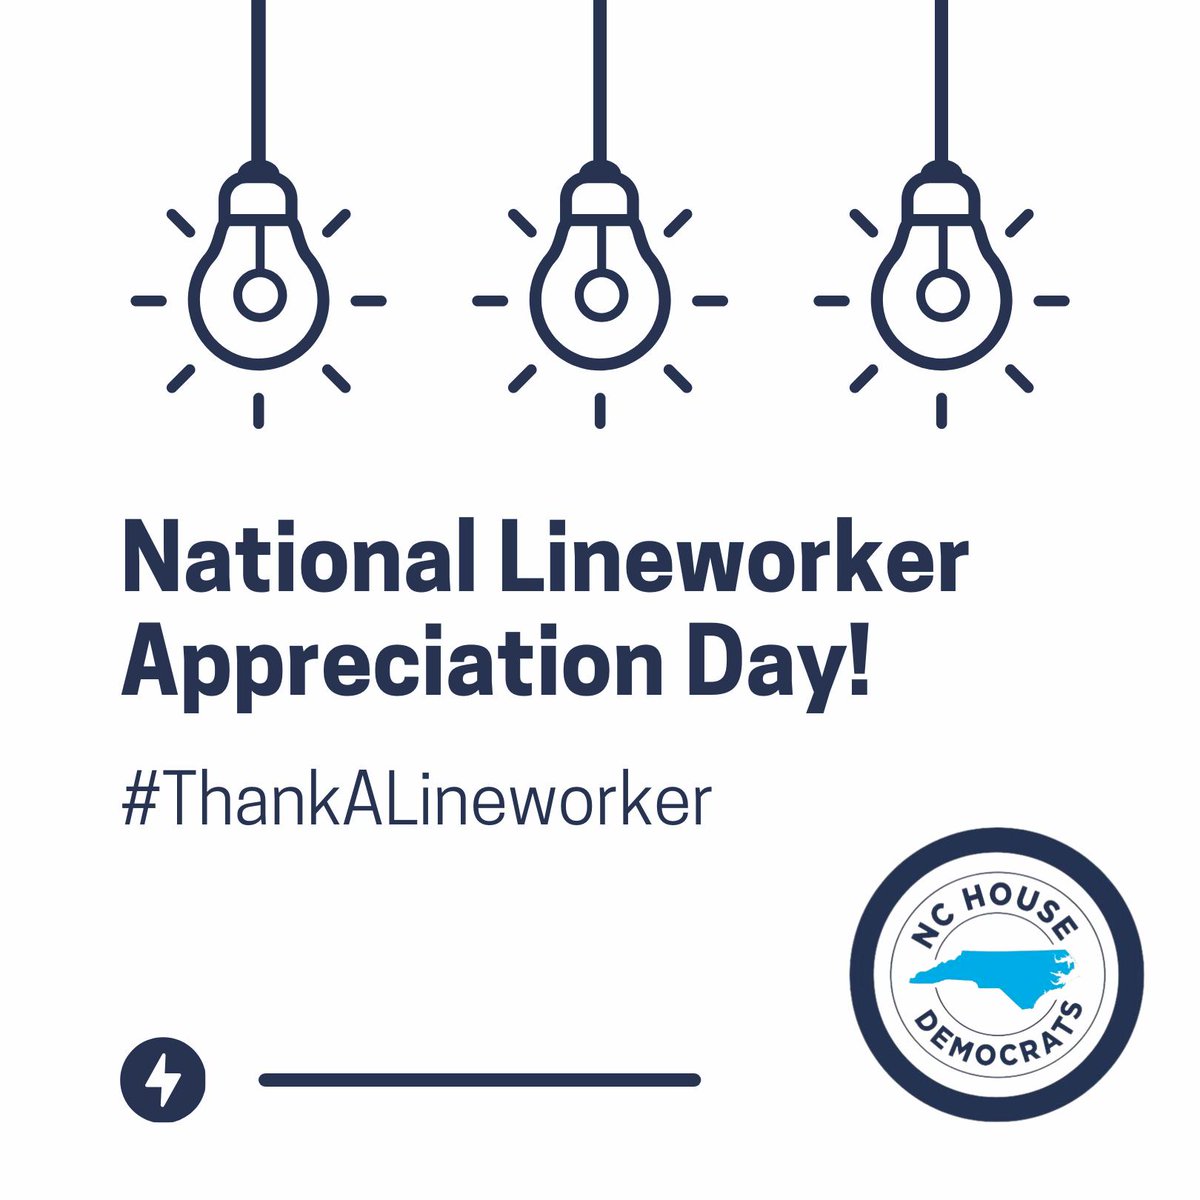 Today, we are thankful for the hard work of lineworkers and all they do to help keep North Carolinians' lights on. #ThankALineworker